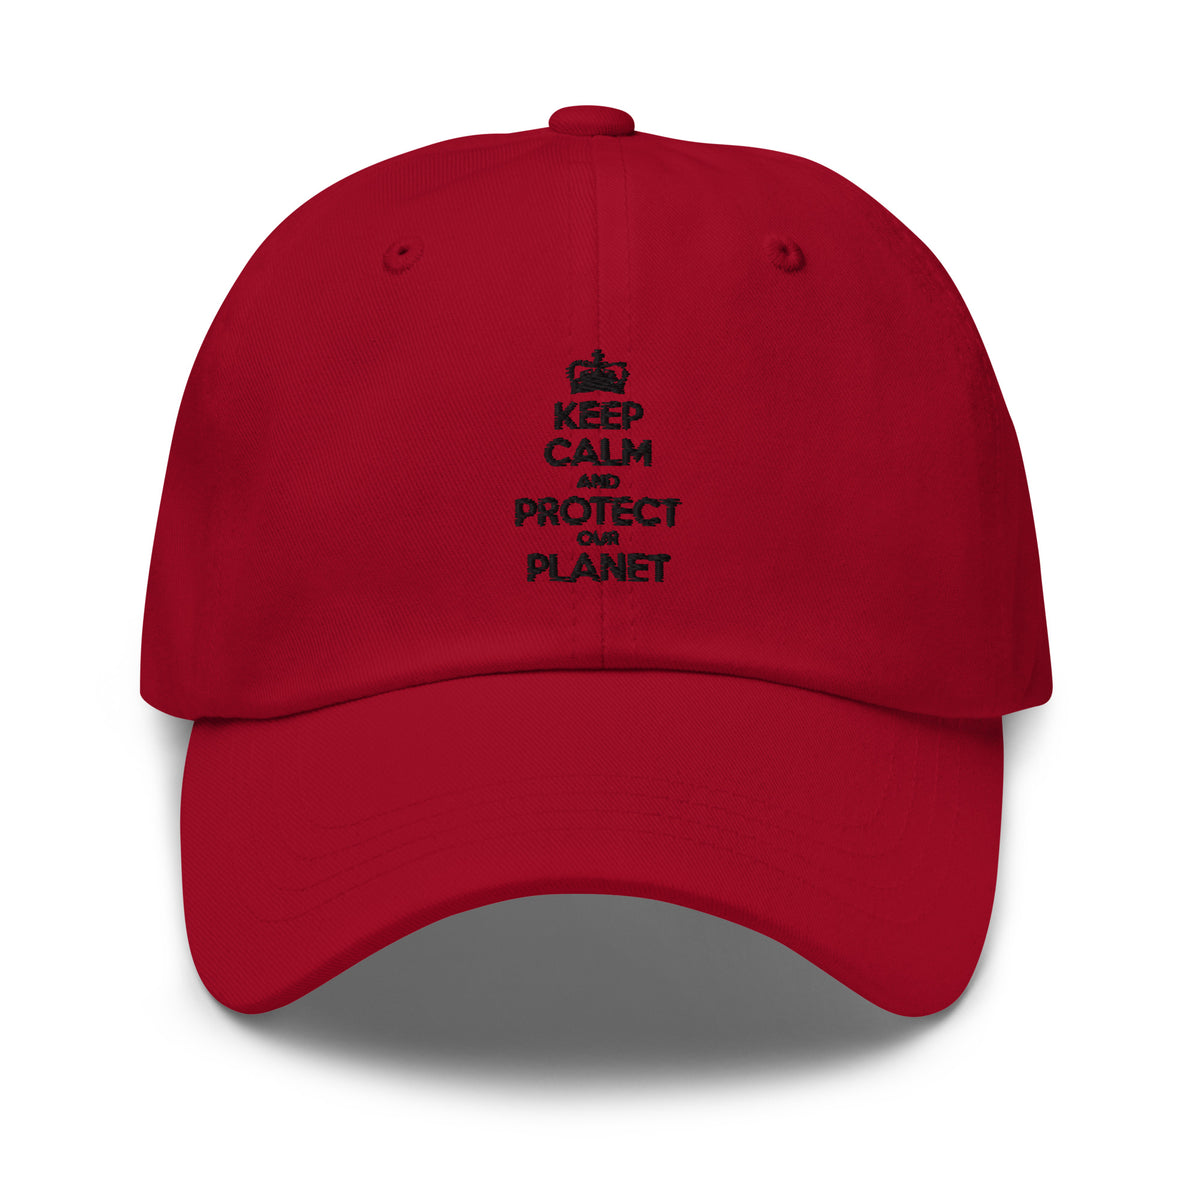 KEEP CALM PROTECT THE PLANET Dad hat